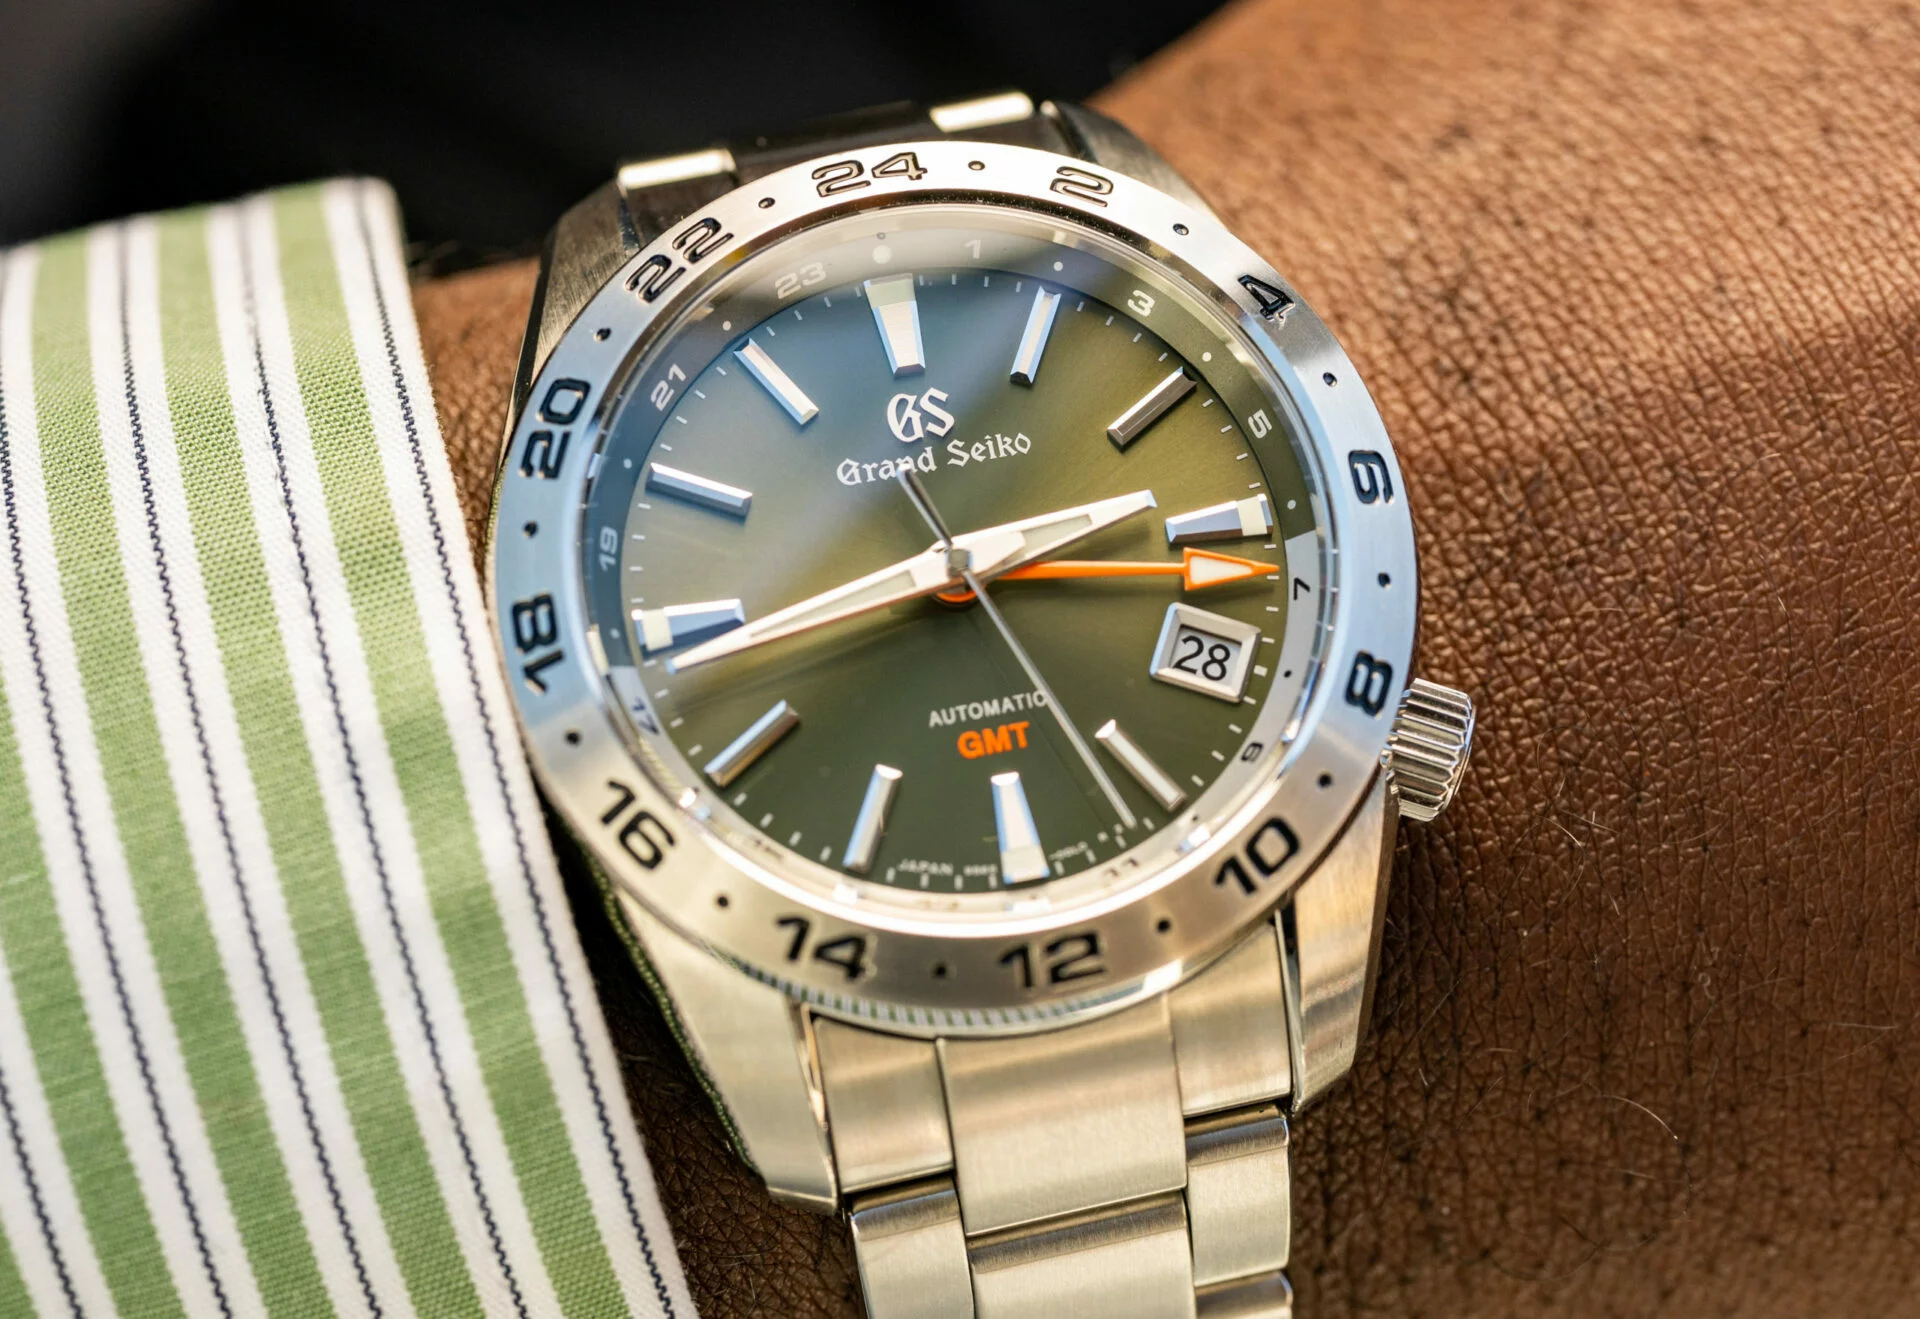 Six months later: Am I still in love with my Grand Seiko SBGM247?